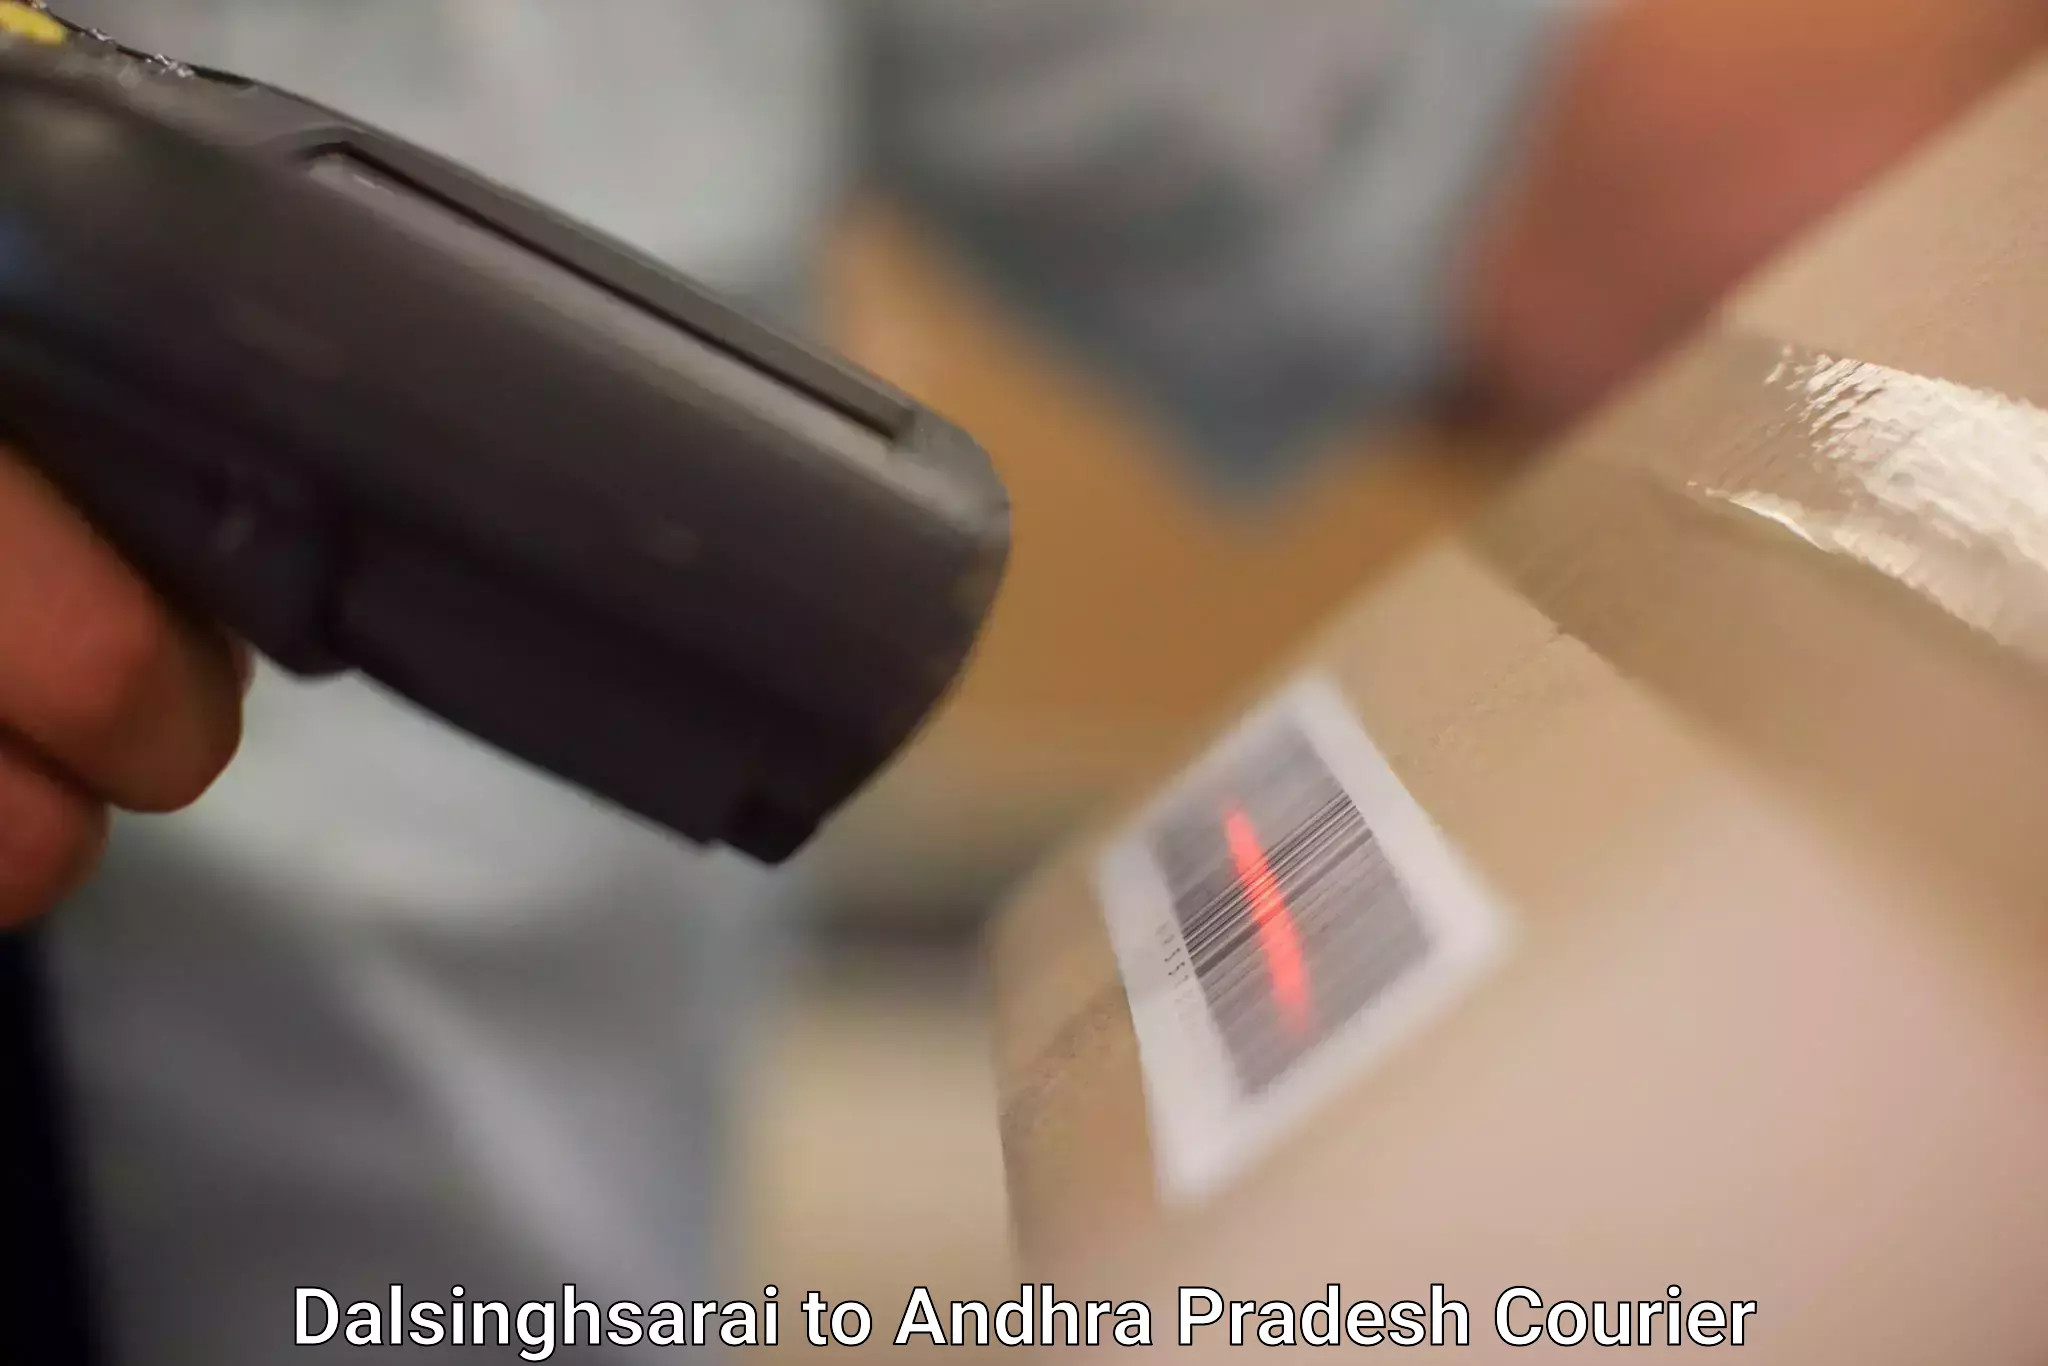 State-of-the-art courier technology Dalsinghsarai to Rajam